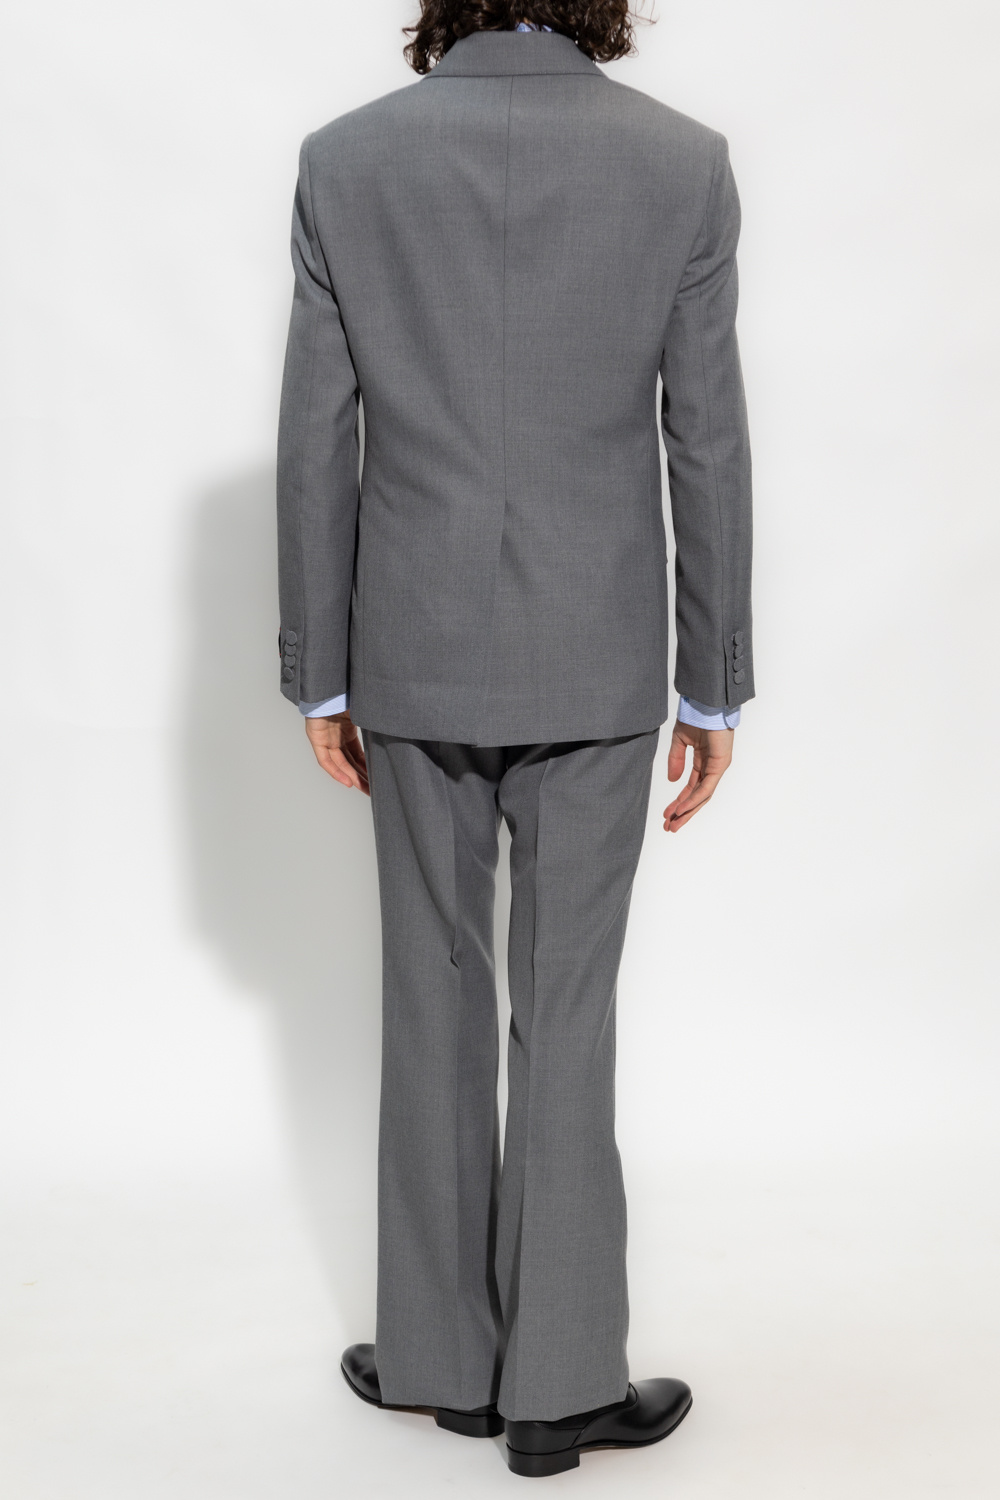 Gucci Suit with logo | Men's Clothing | Vitkac